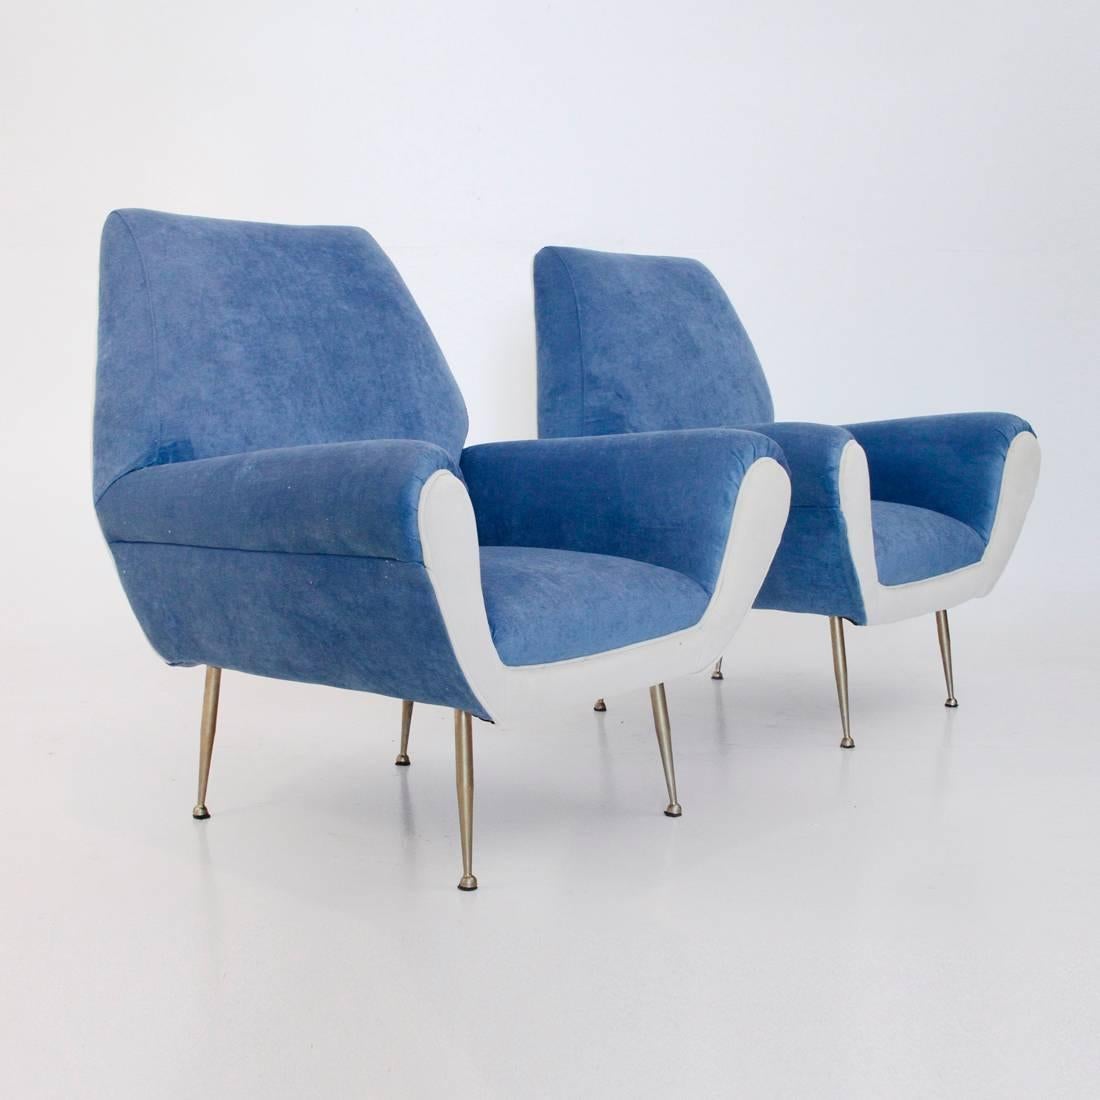 Sophisticated pair of armchairs 1960s Italian manufacture.
Padded and lined wooden frame with new fabric in blue velvet with white front.
Metal stiletto legs.
Good general condition.

Dimensions: Width 85 cm, depth 80 cm, height 86 cm, seat